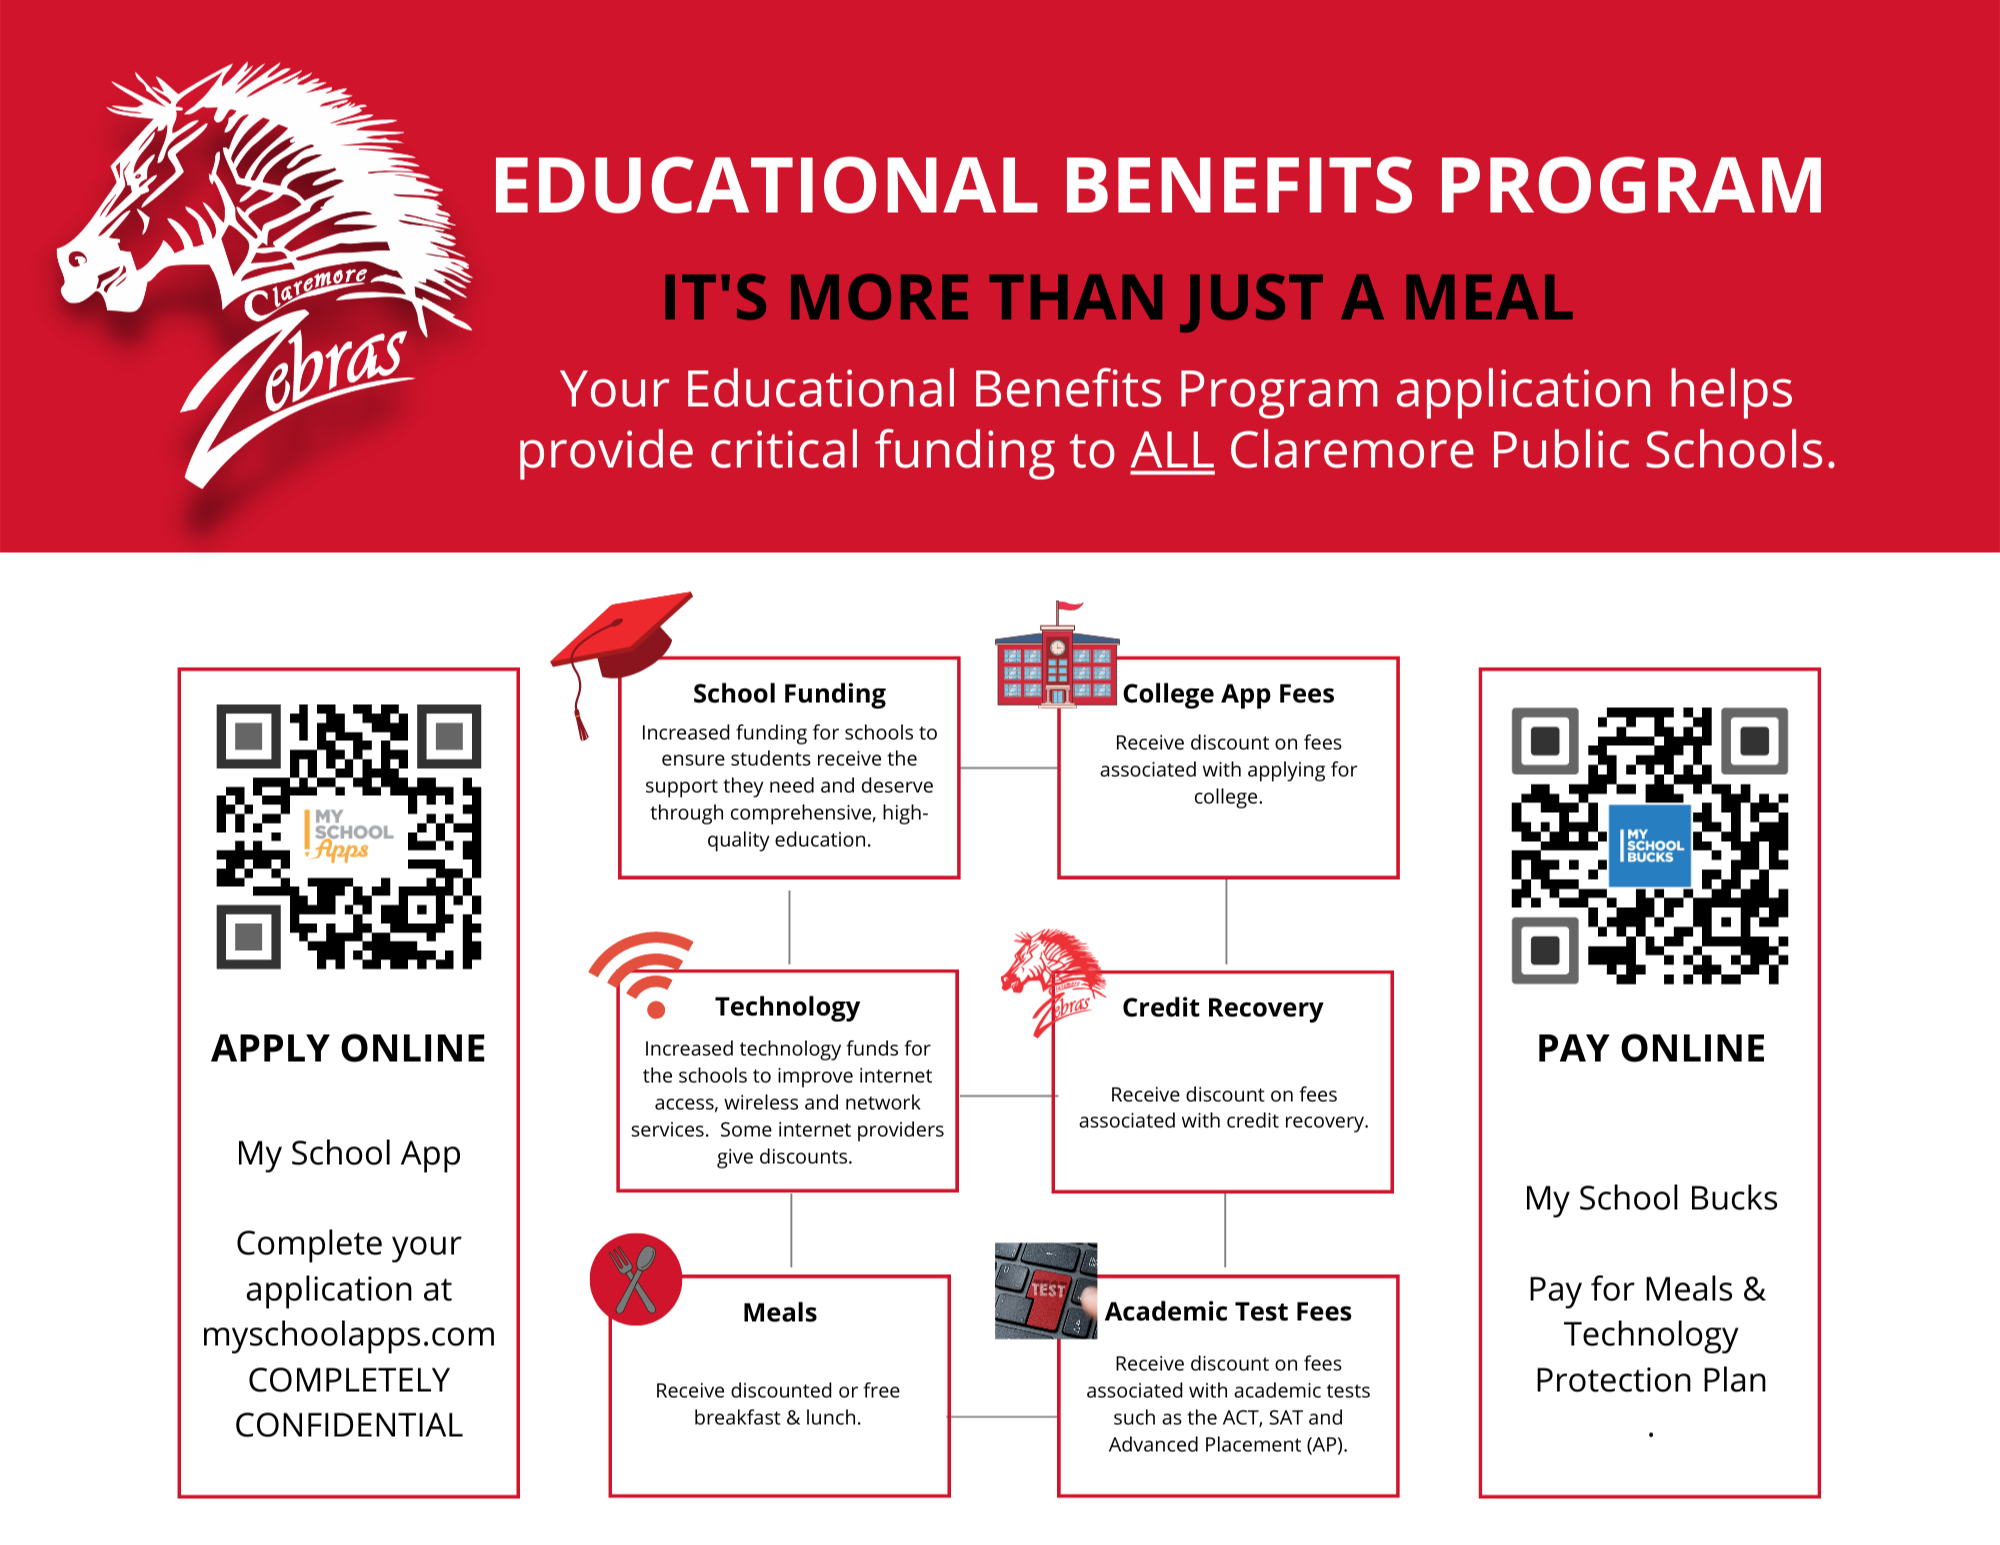 Free & Reduced Lunch Program